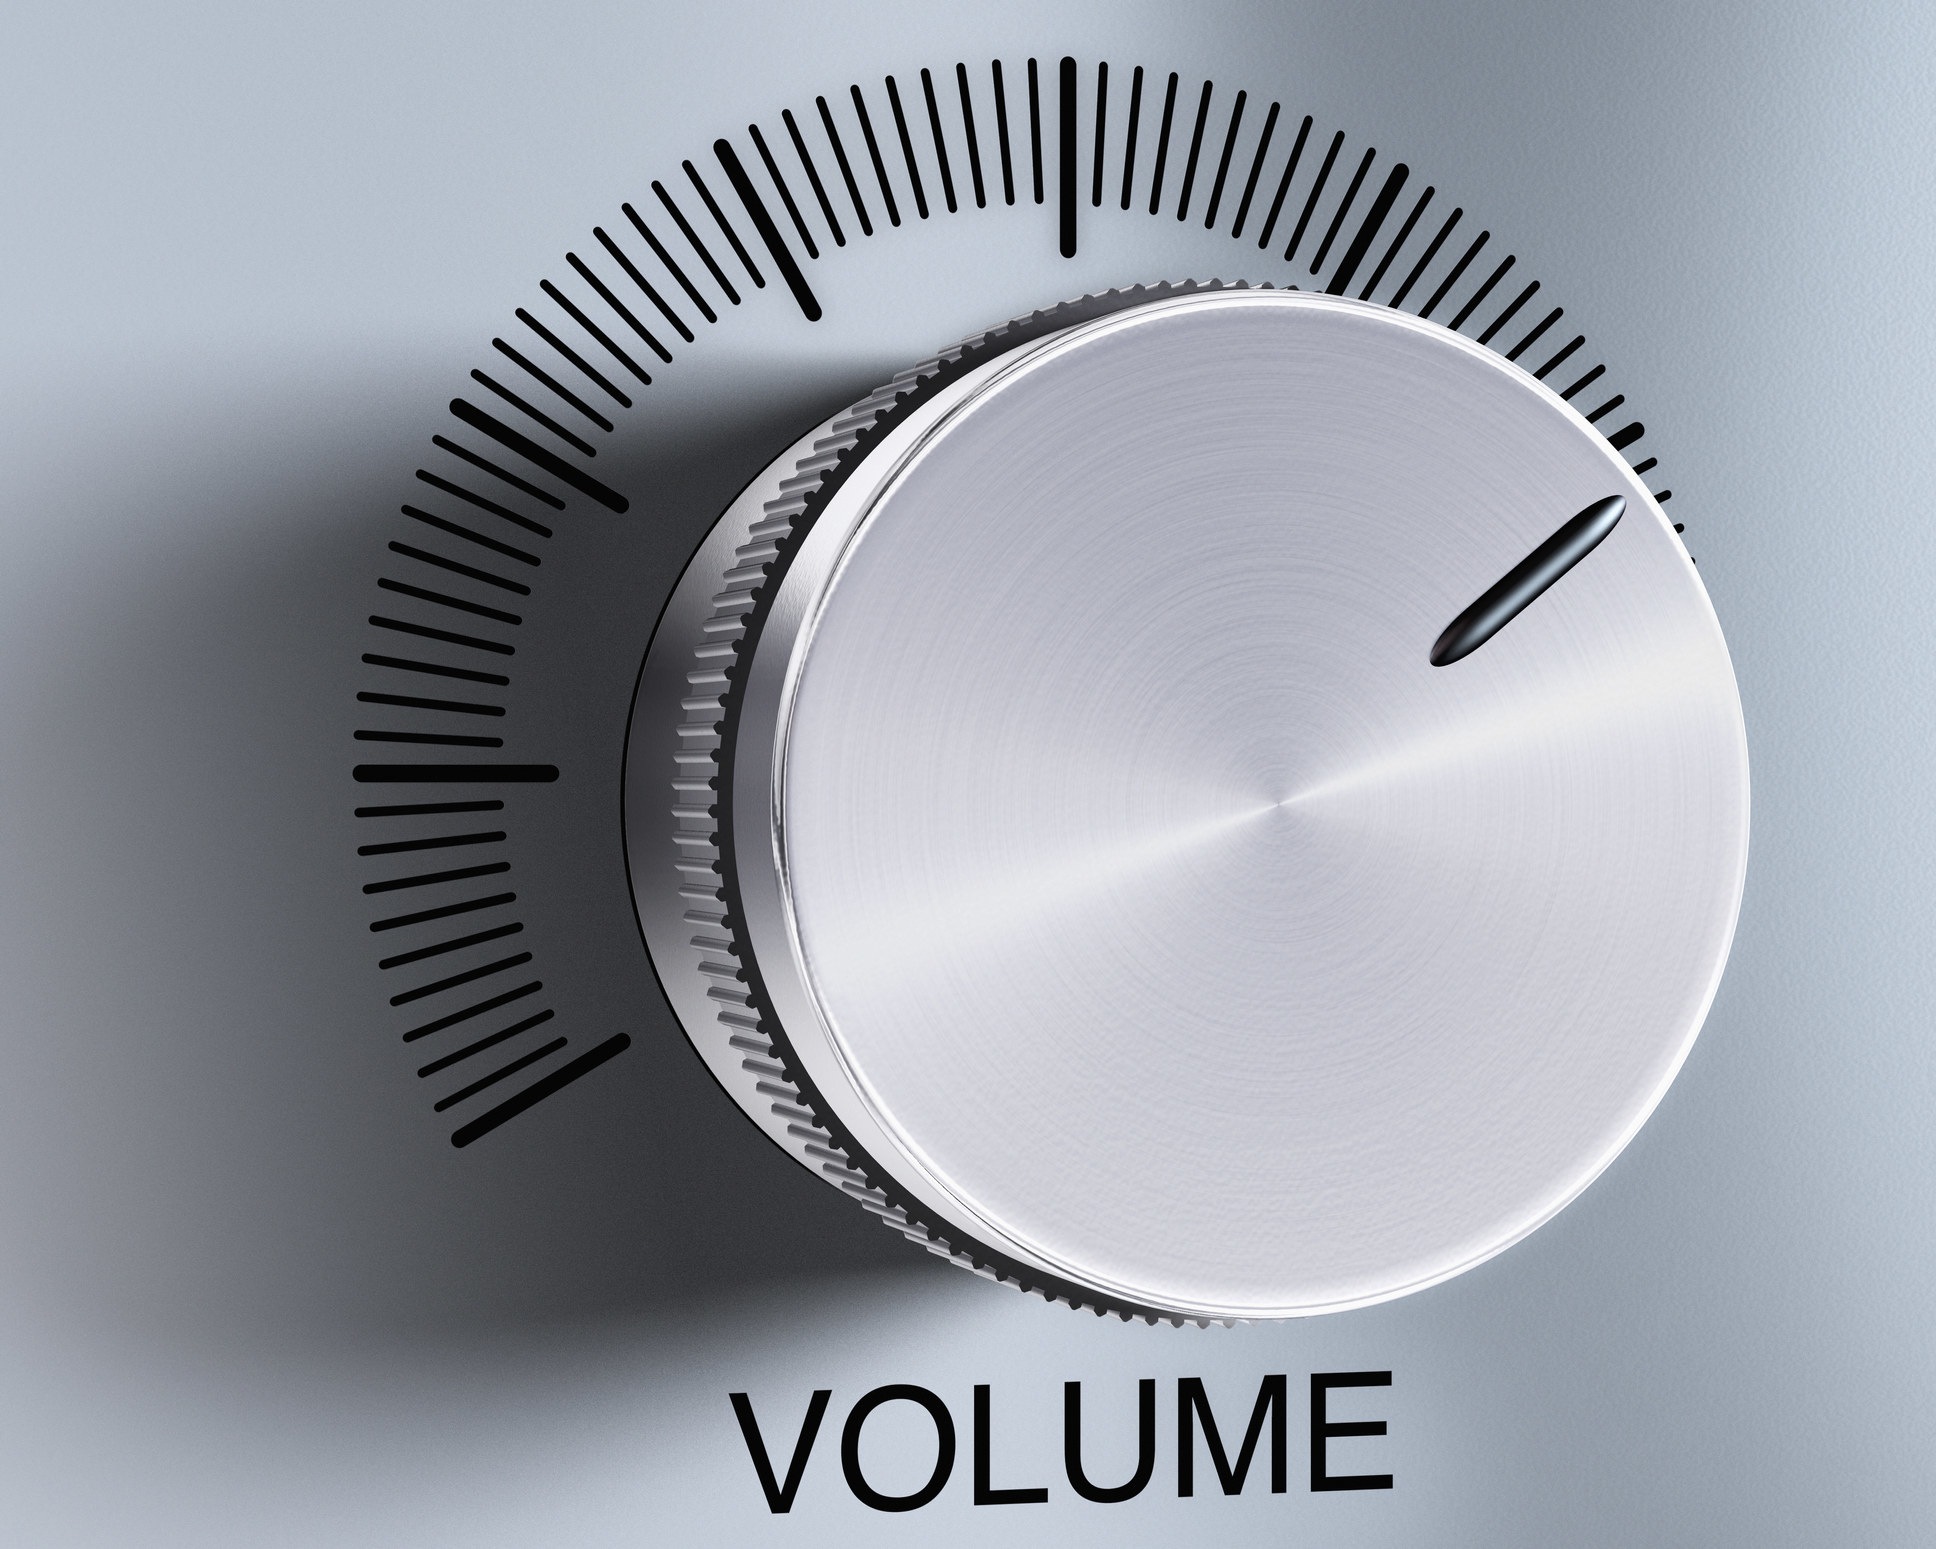 volume dial turned up